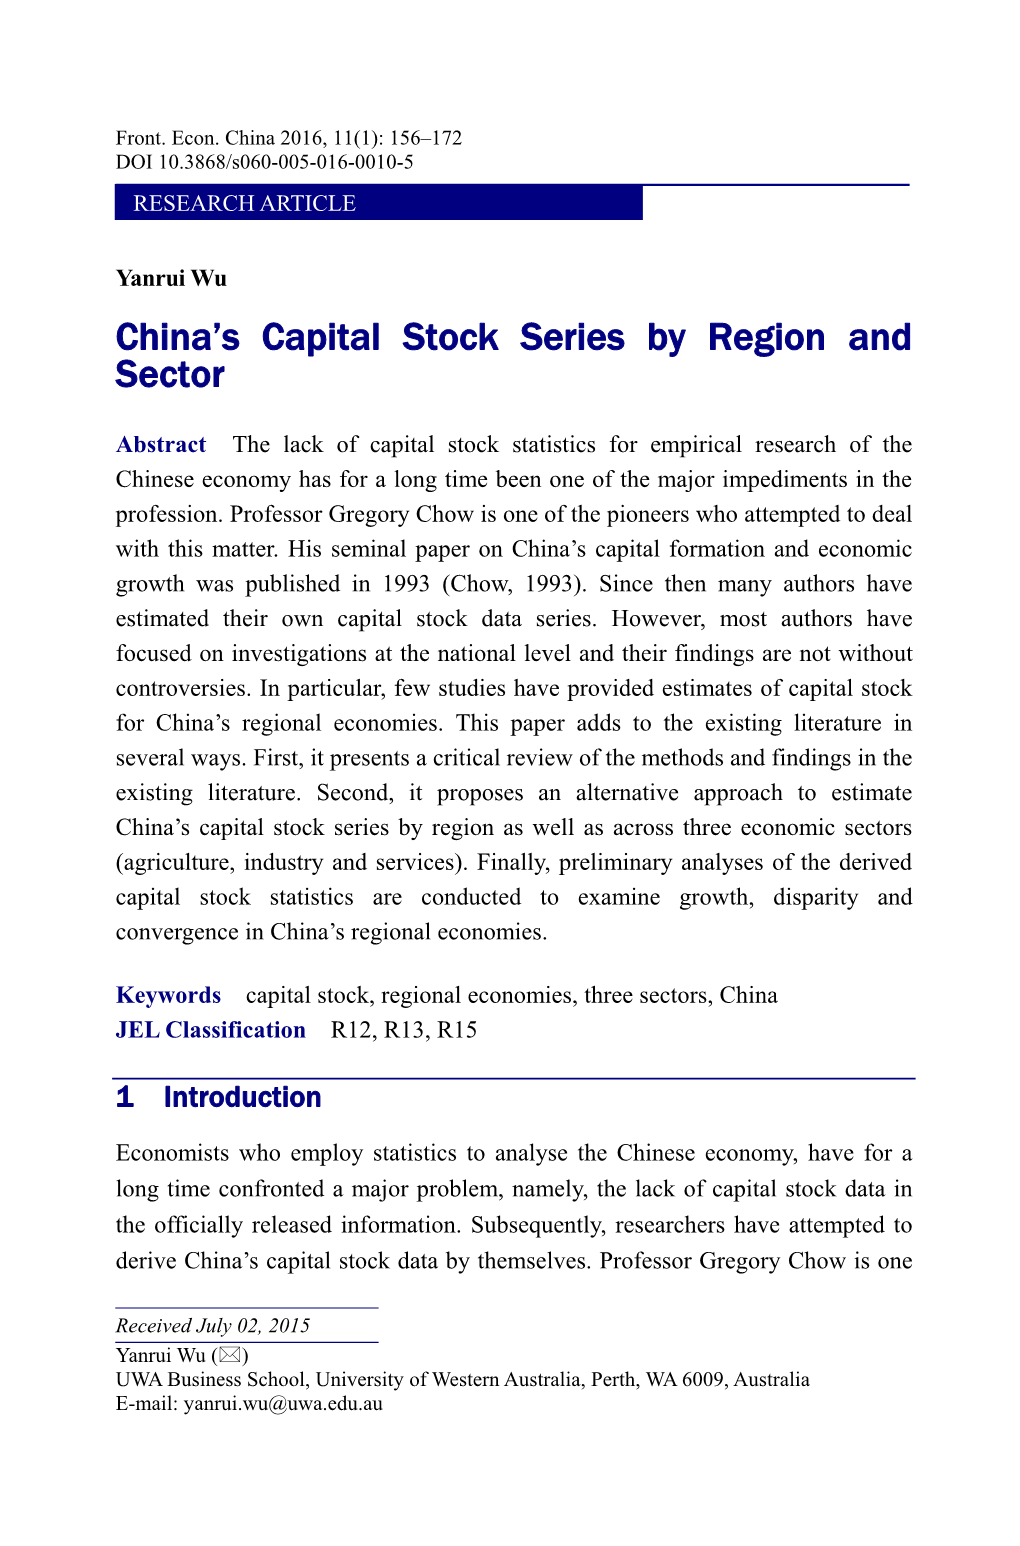 China's Capital Stock Series by Region and Sector